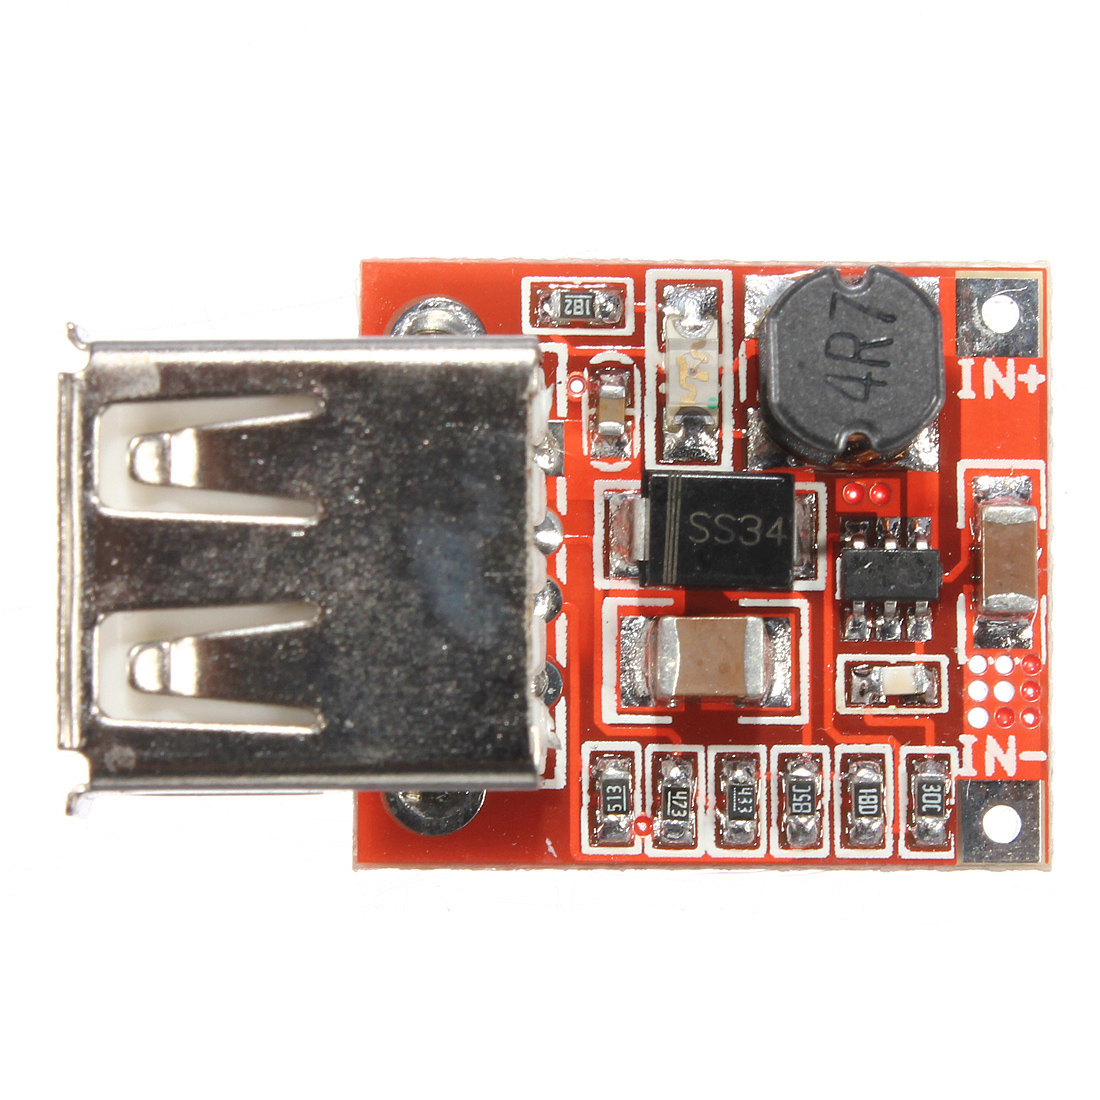 3V-To-5V-1A-USB-Charger-DC-DC-Converter-Step-Up-Boost-Module-For-Phone-MP3-MP4-Geekcreit-for-Arduino-89326-2